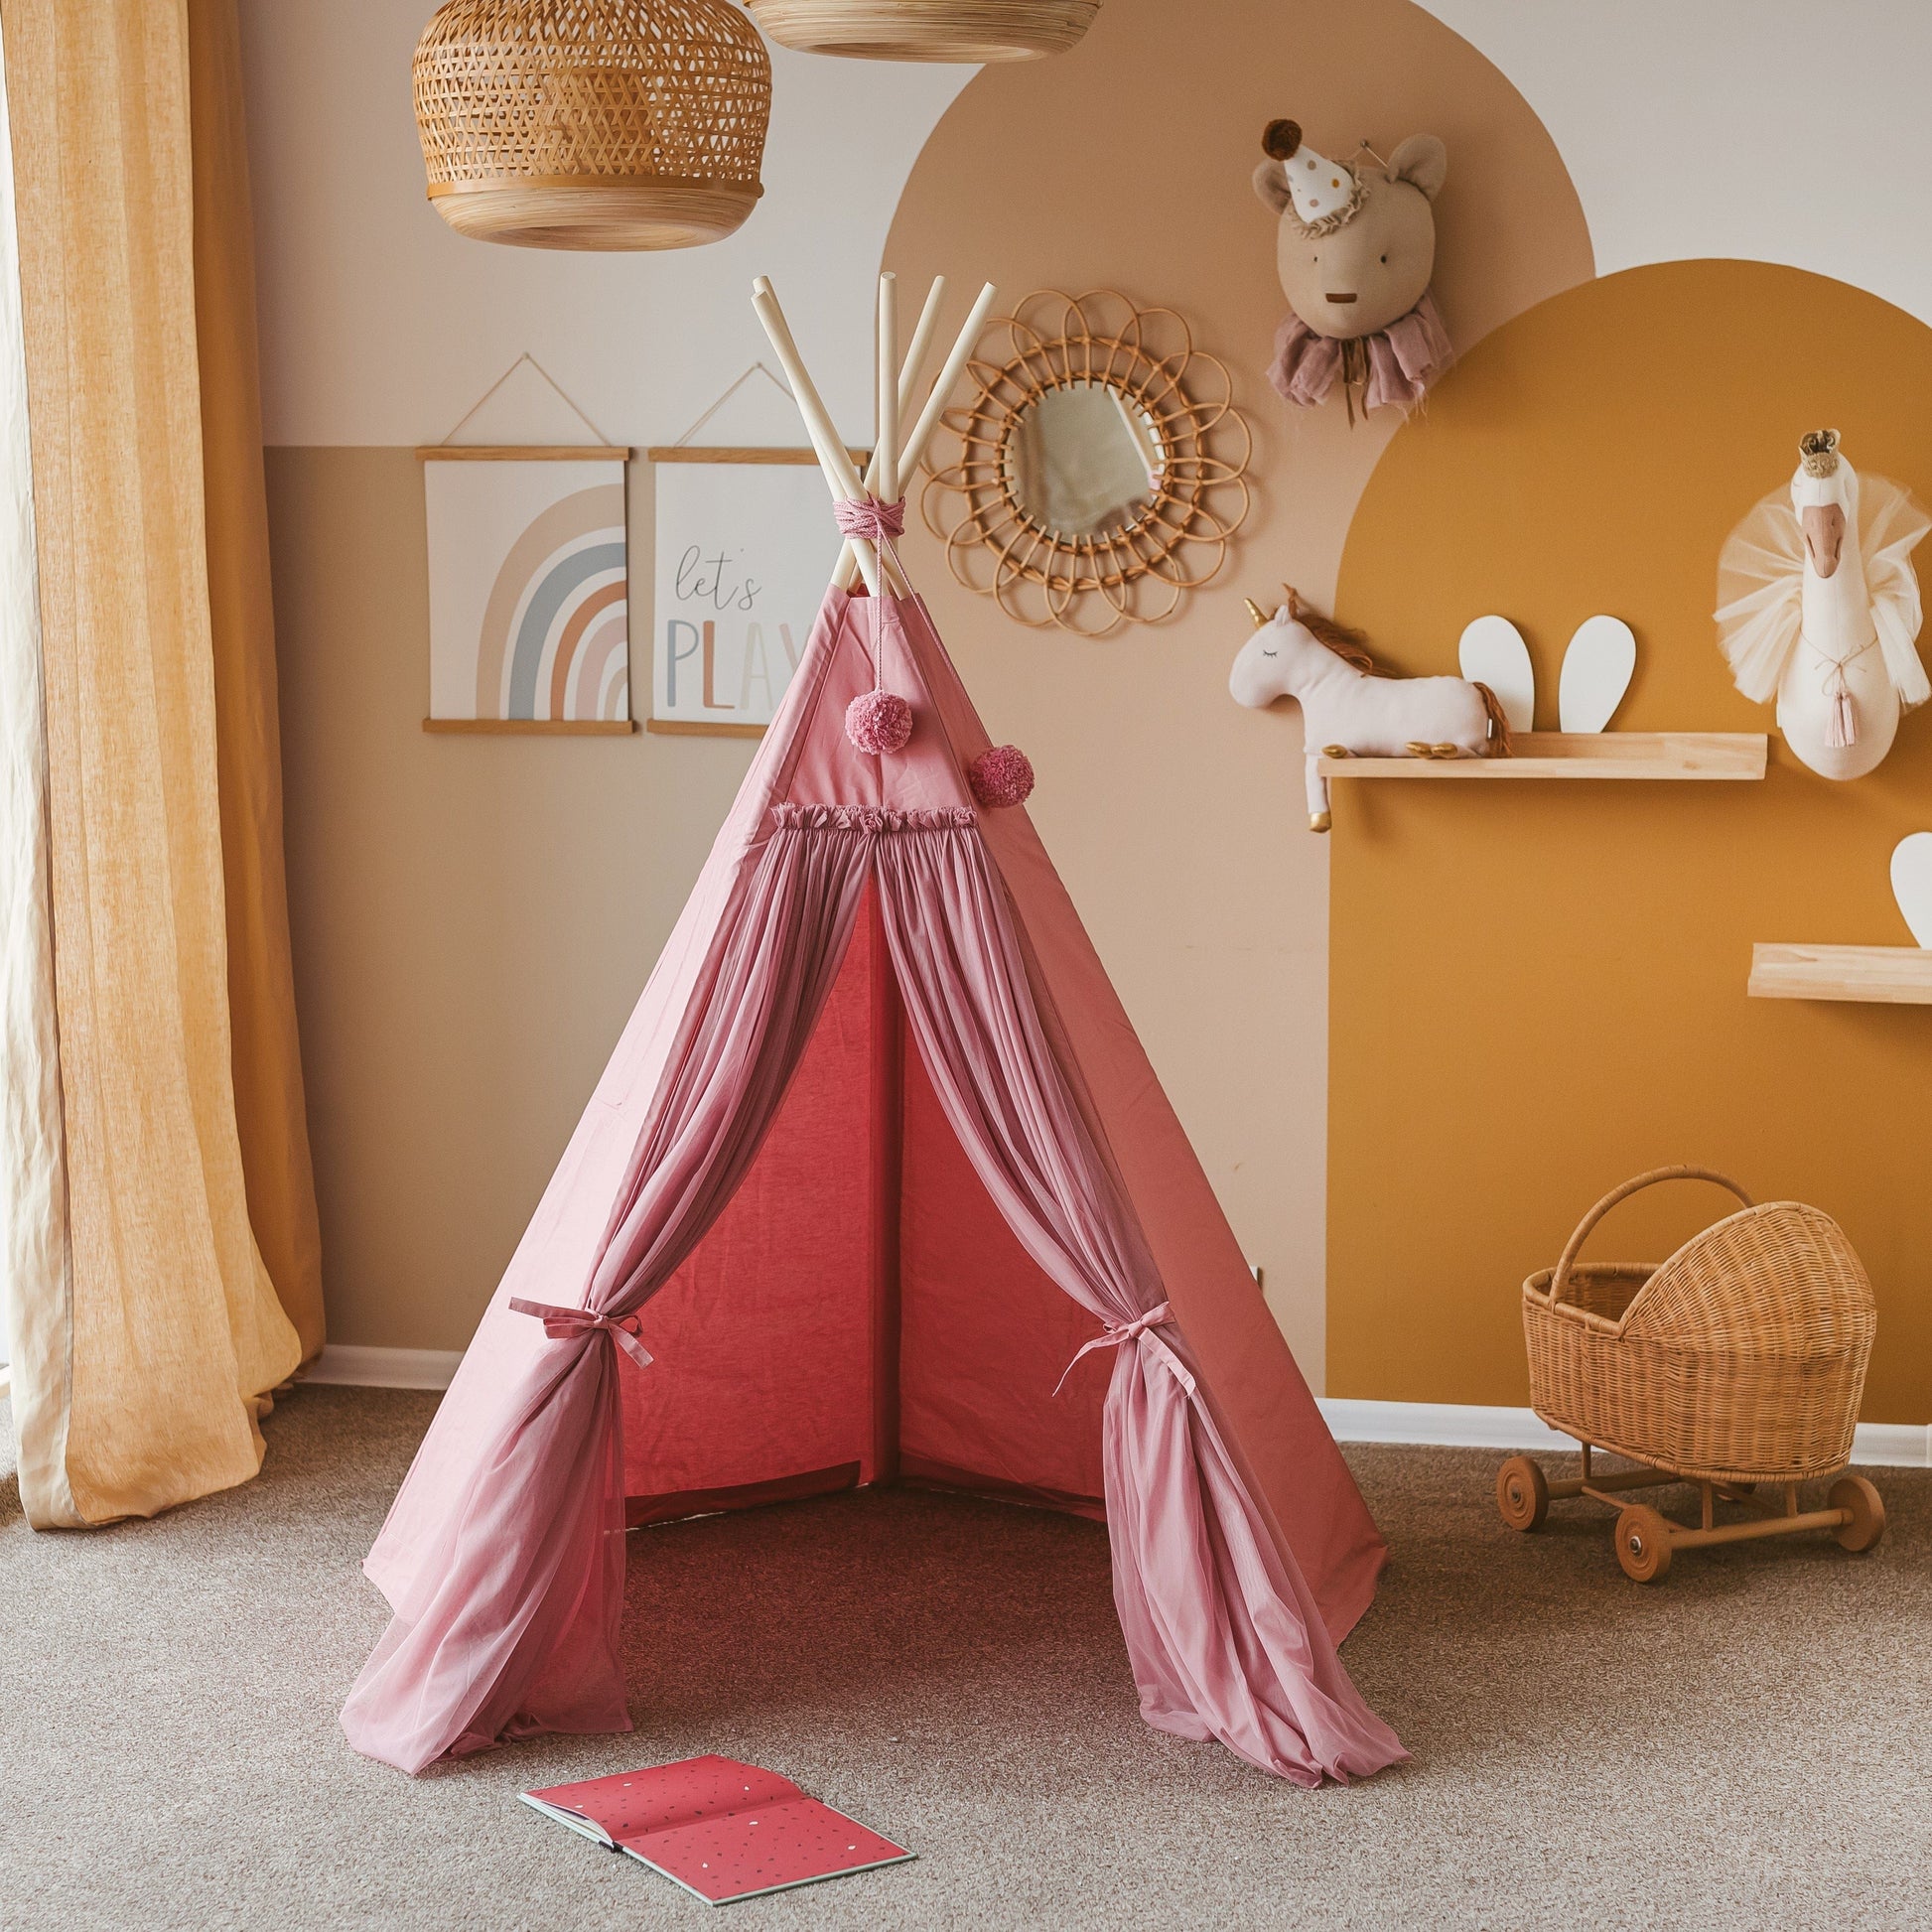 MINICAMP Fairy Kids Play Tent in Grey in lounge